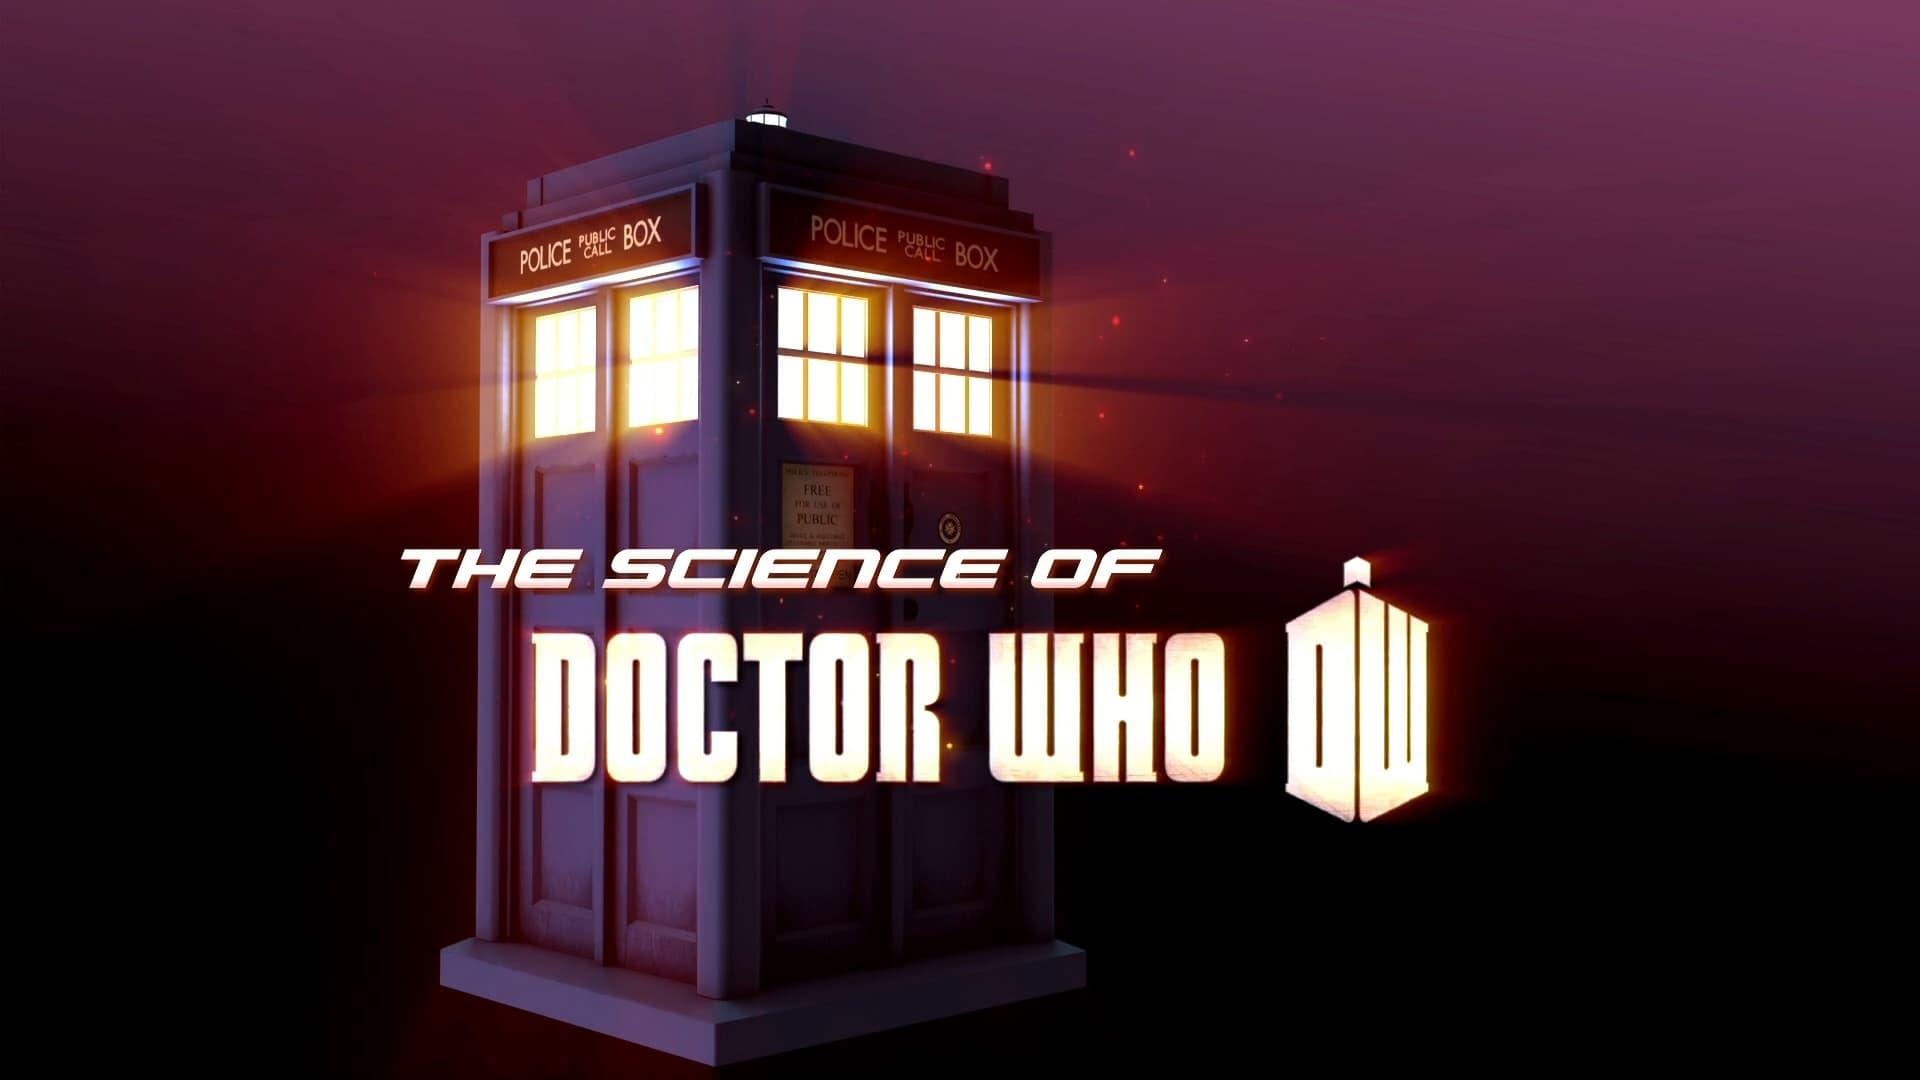 The Science of Doctor Who backdrop